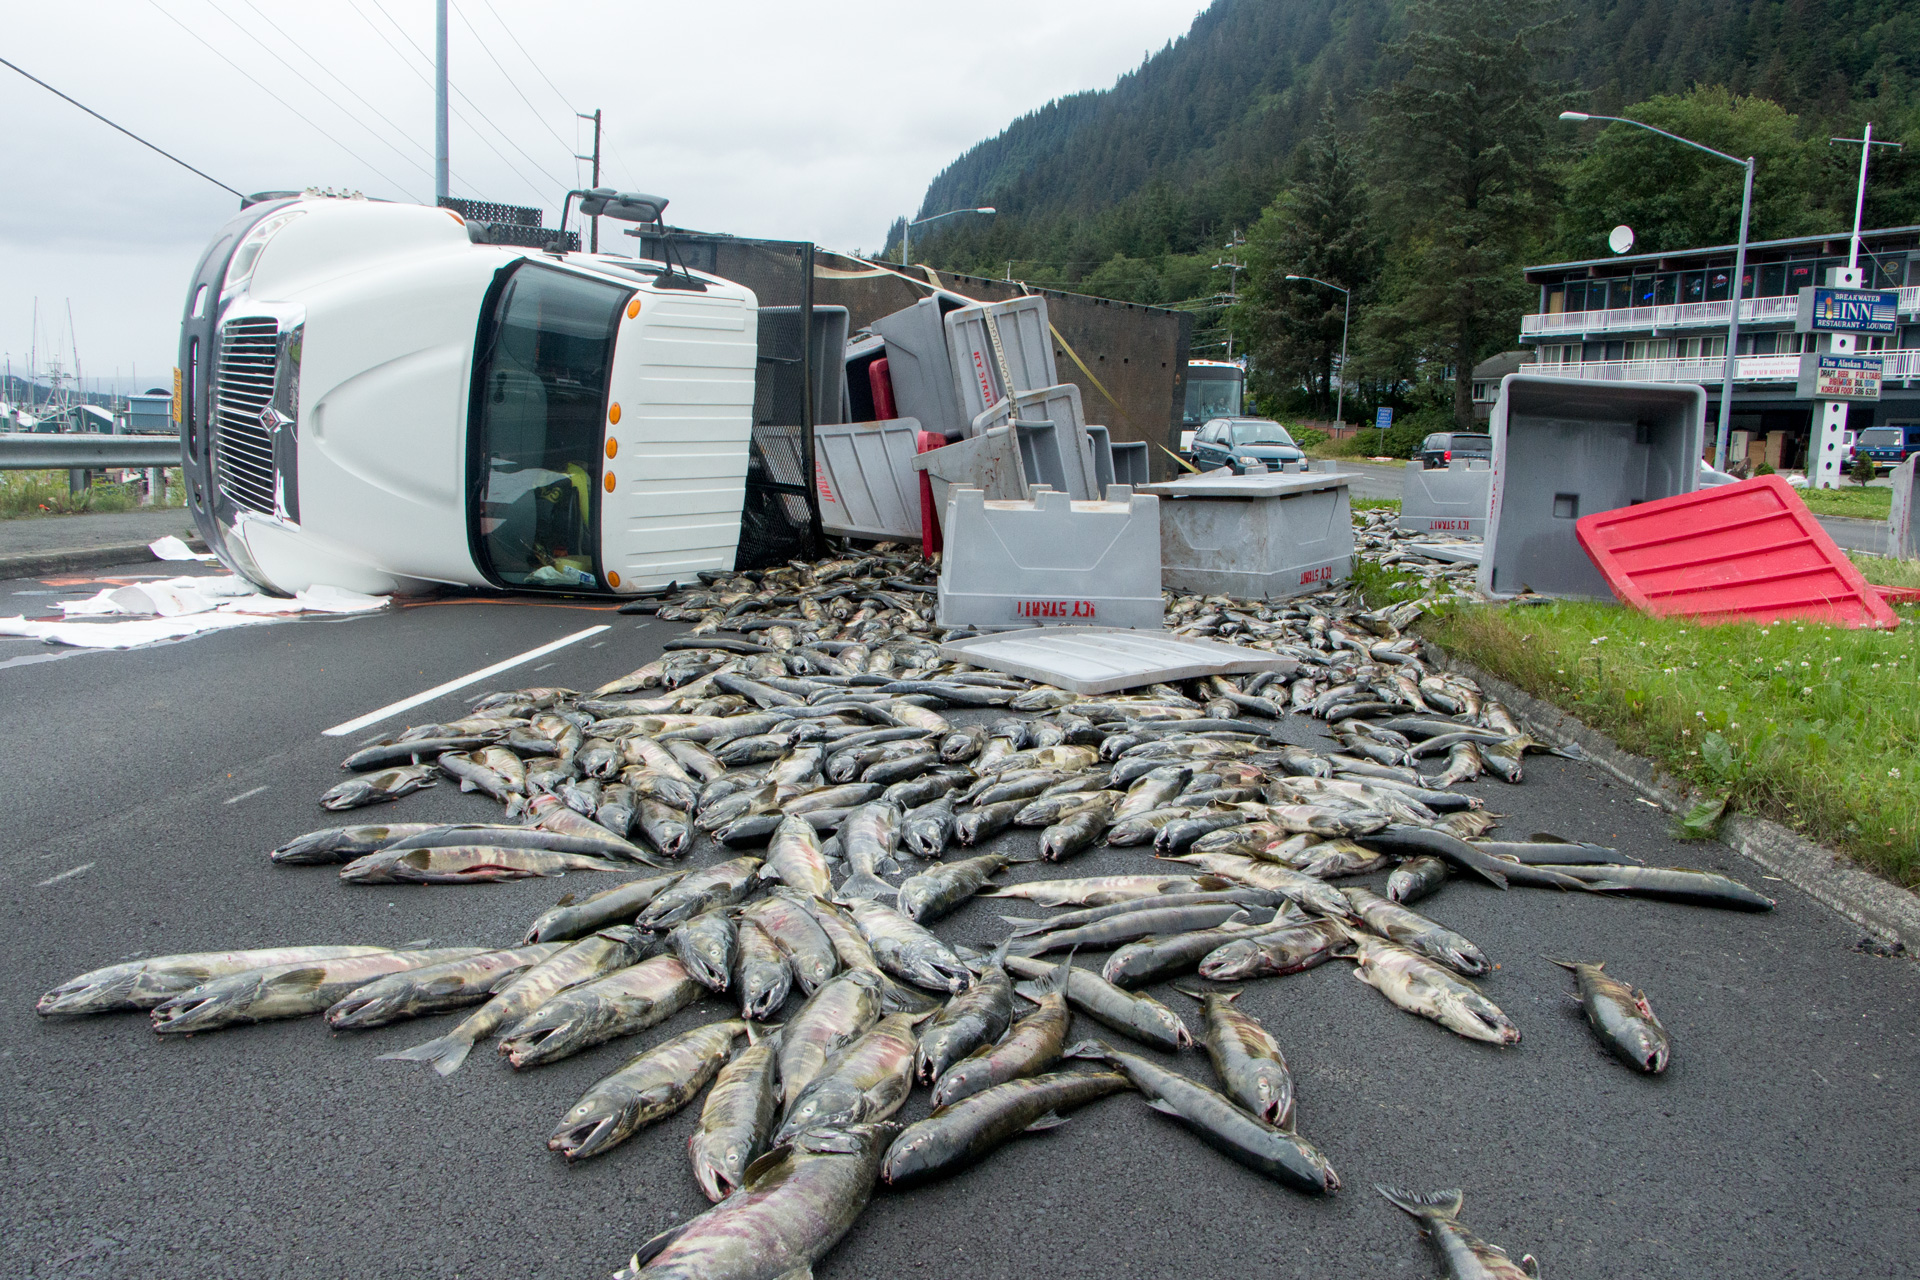 16,000lbs of salmon spill from a rolled truck on Egan Drive on July 25th, 2016. (Photo by Mikko Wilson, KTOO - Juneau)